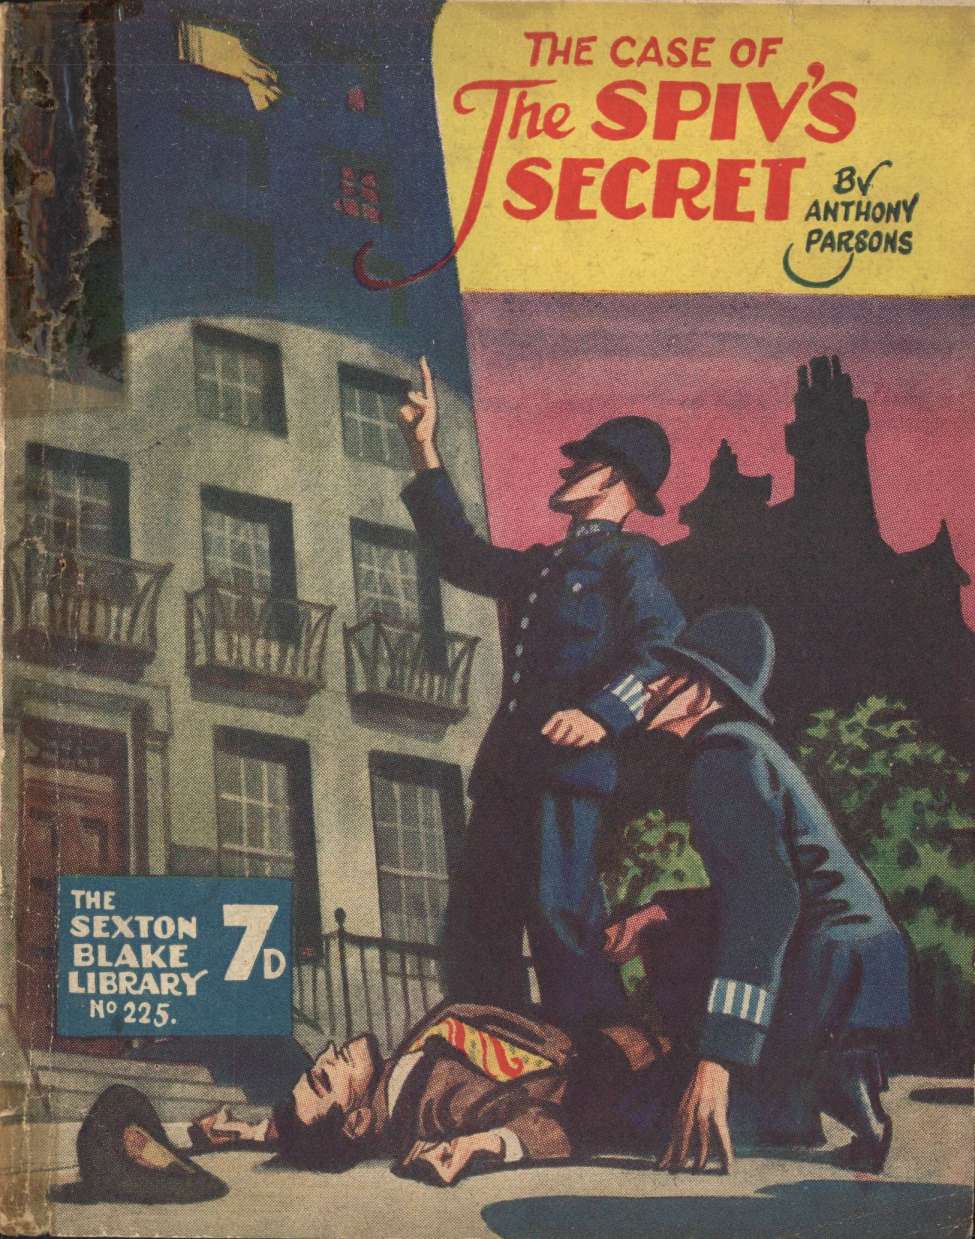 Comic Book Cover For Sexton Blake Library S3 225 - The Case of the Spiv's Secret